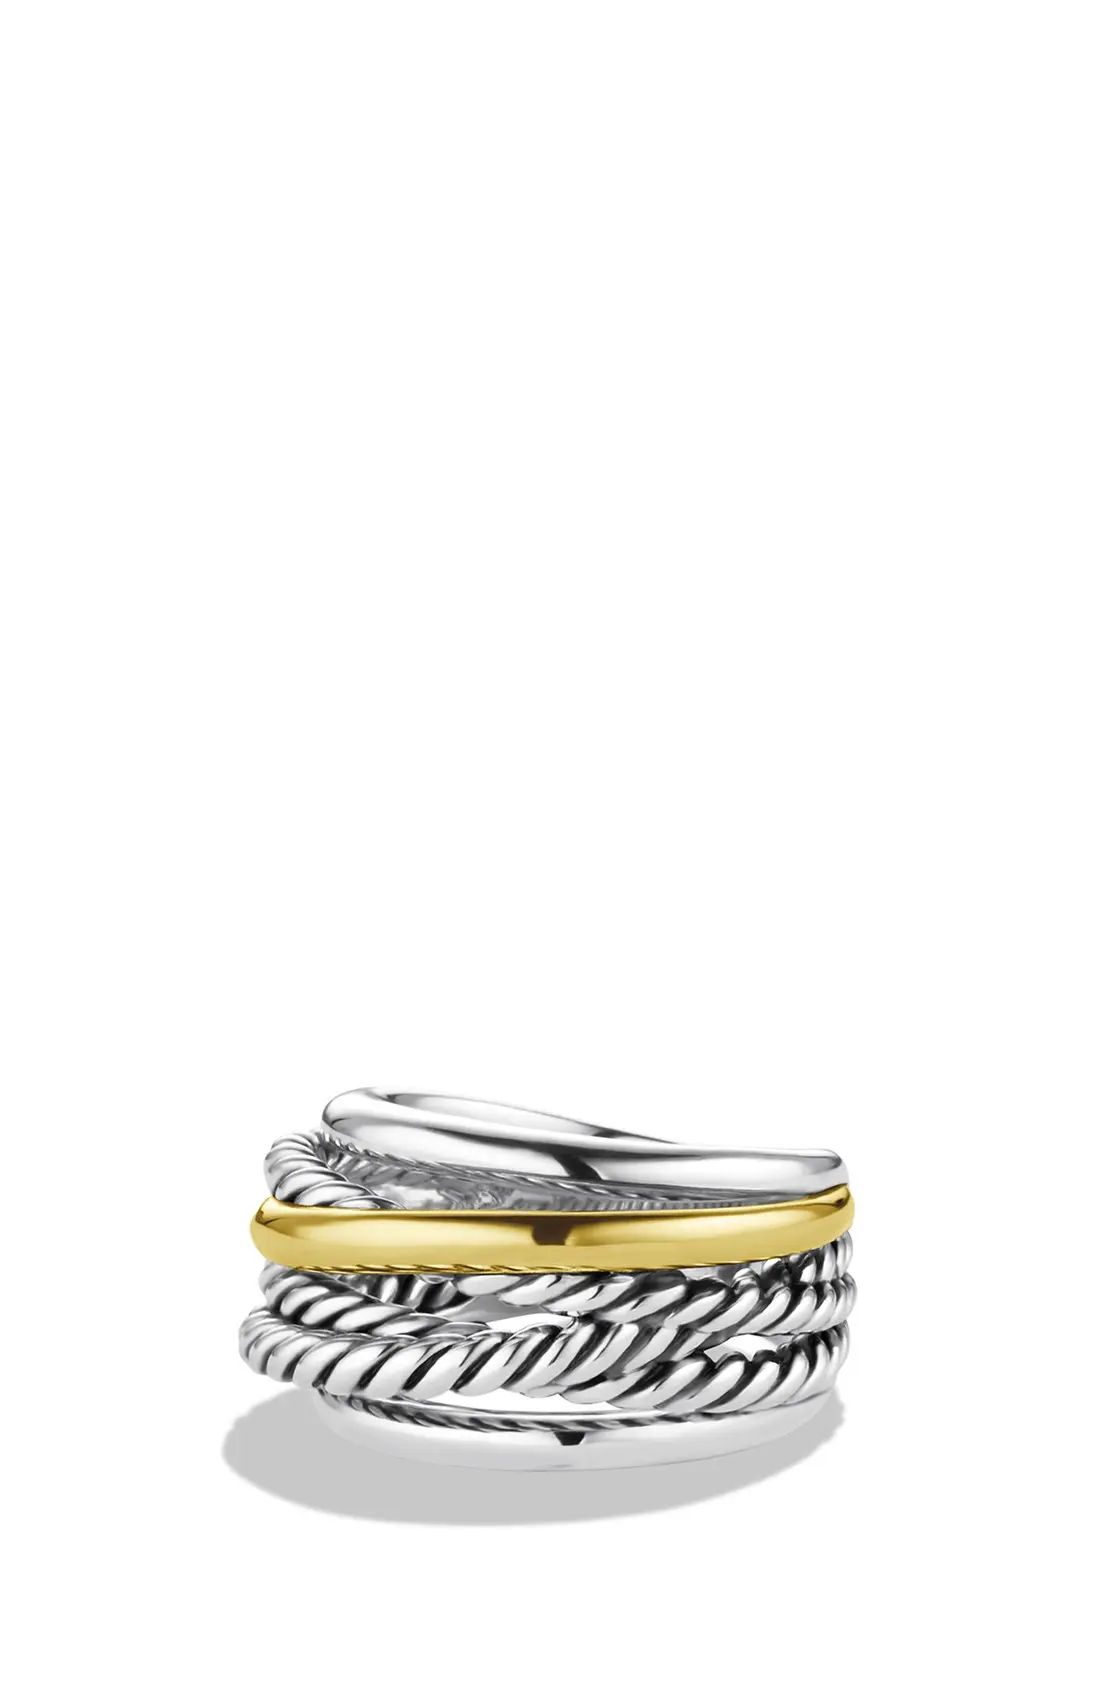 'Crossover' Narrow Ring with Gold | Nordstrom